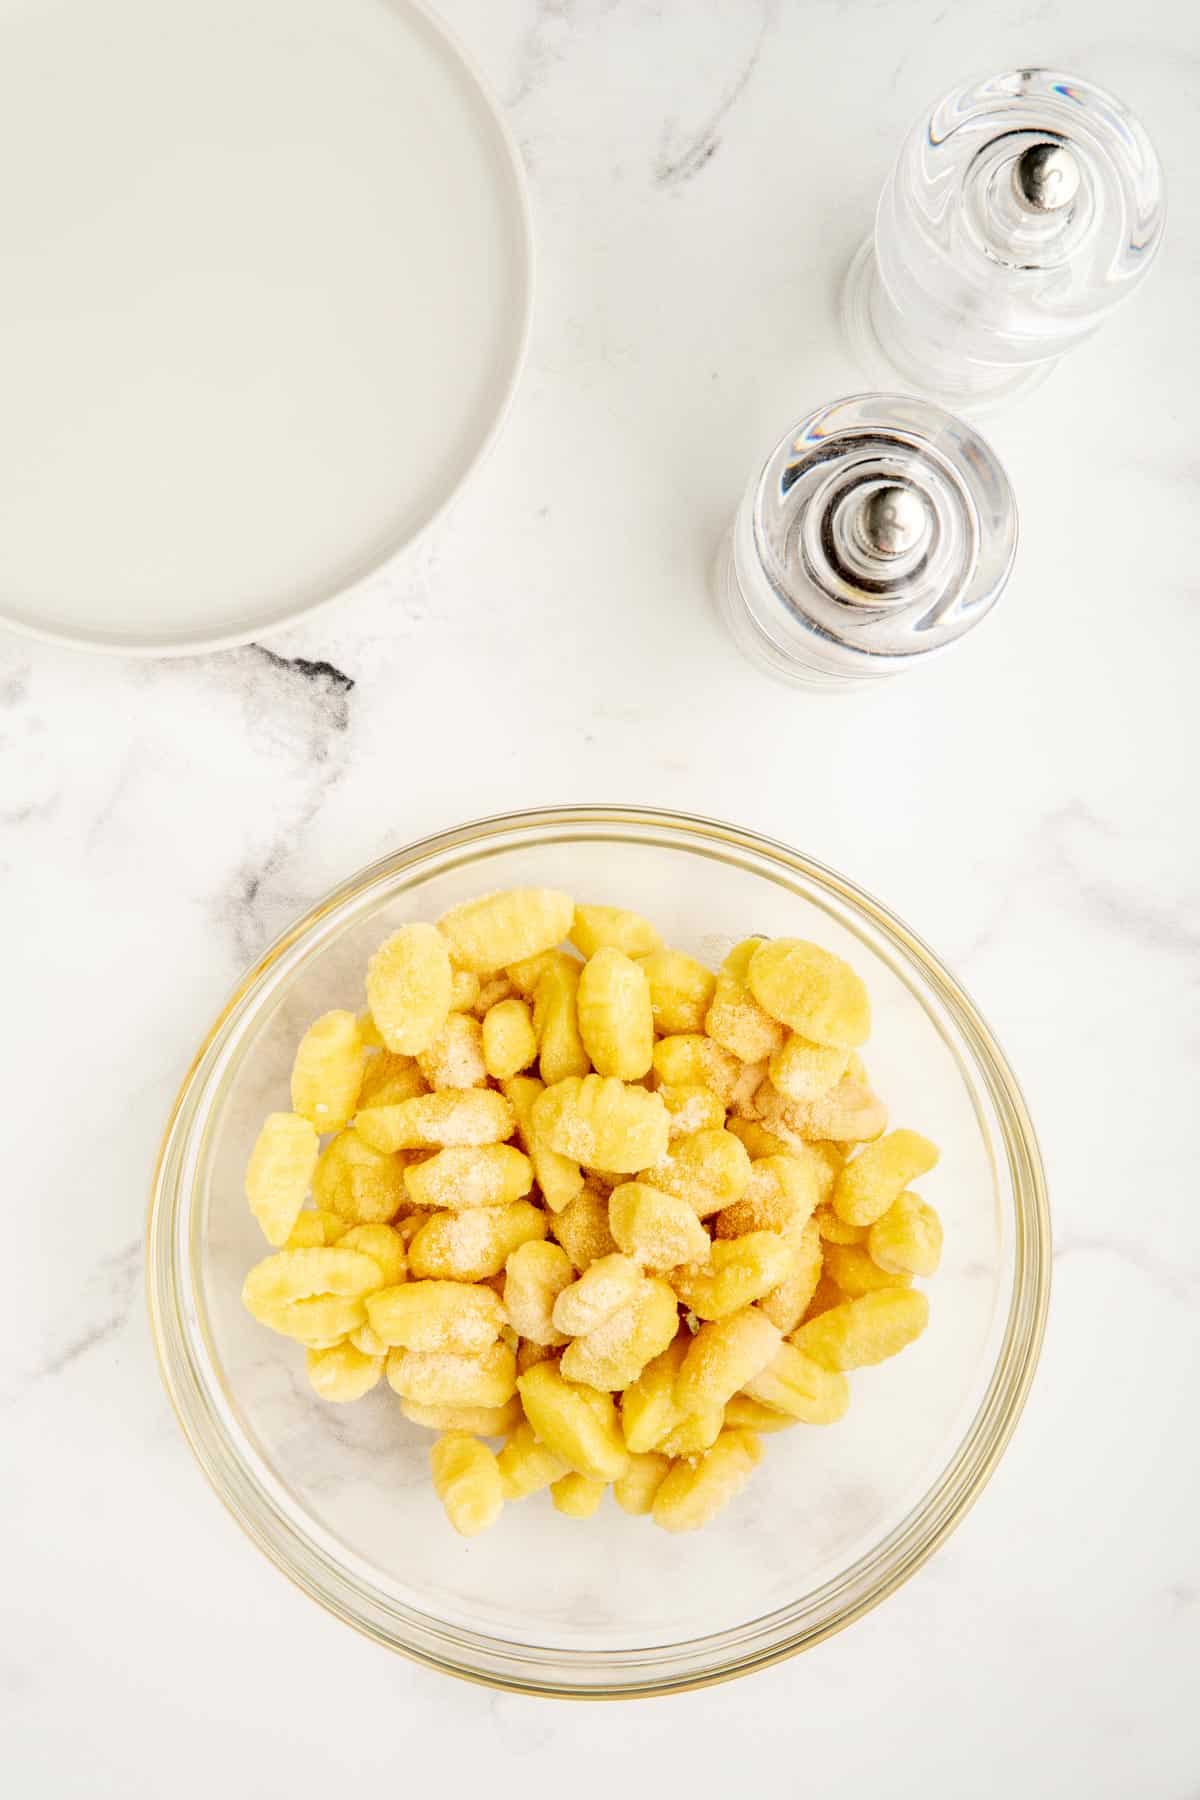 Uncooked gnocchi in a glass bowl with oil and seasonings sprinkled on top.